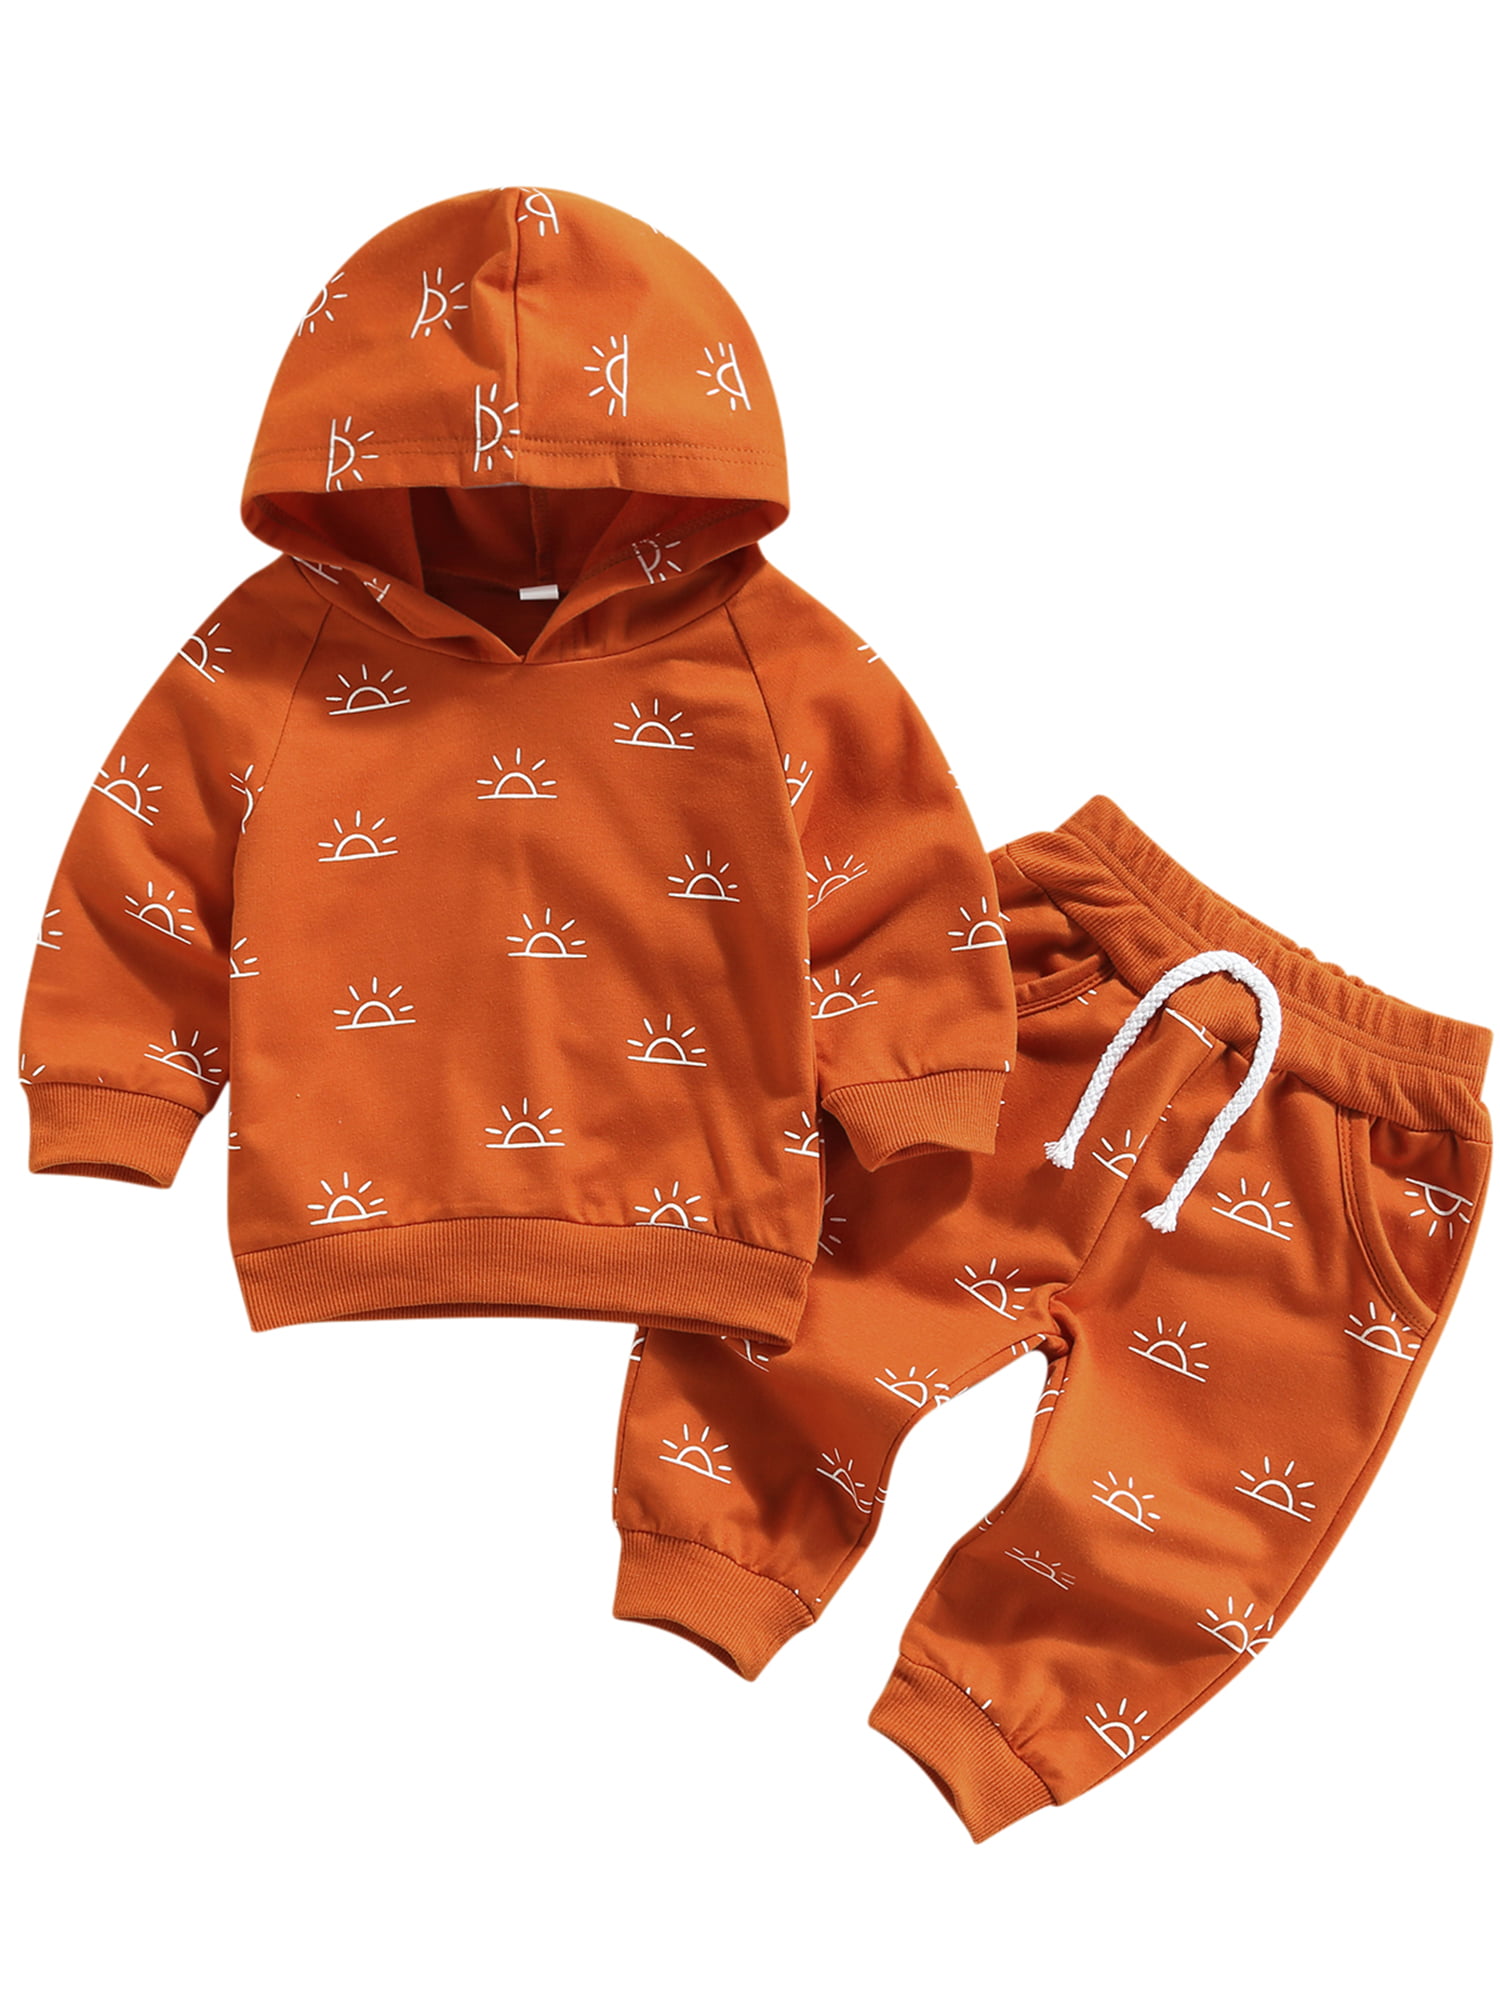 Baby Boys Girls Spring Autumn Clothes Set Hoodie Sweatshirt Pants Casual Outfit 